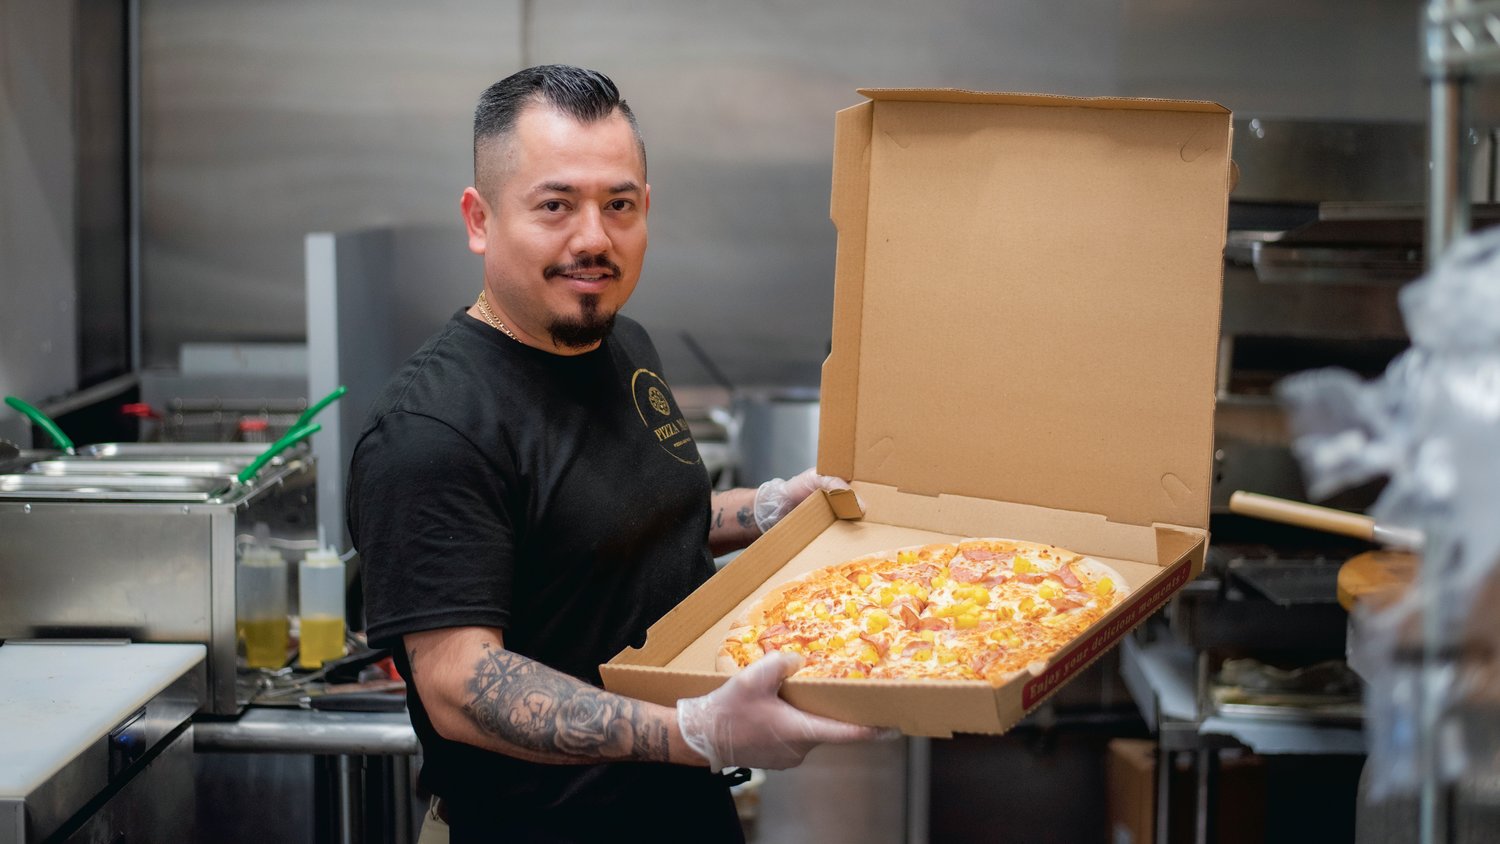 Jose Villegas smiles and holds up a box ready to be served at Pizza Mia in Tenino.